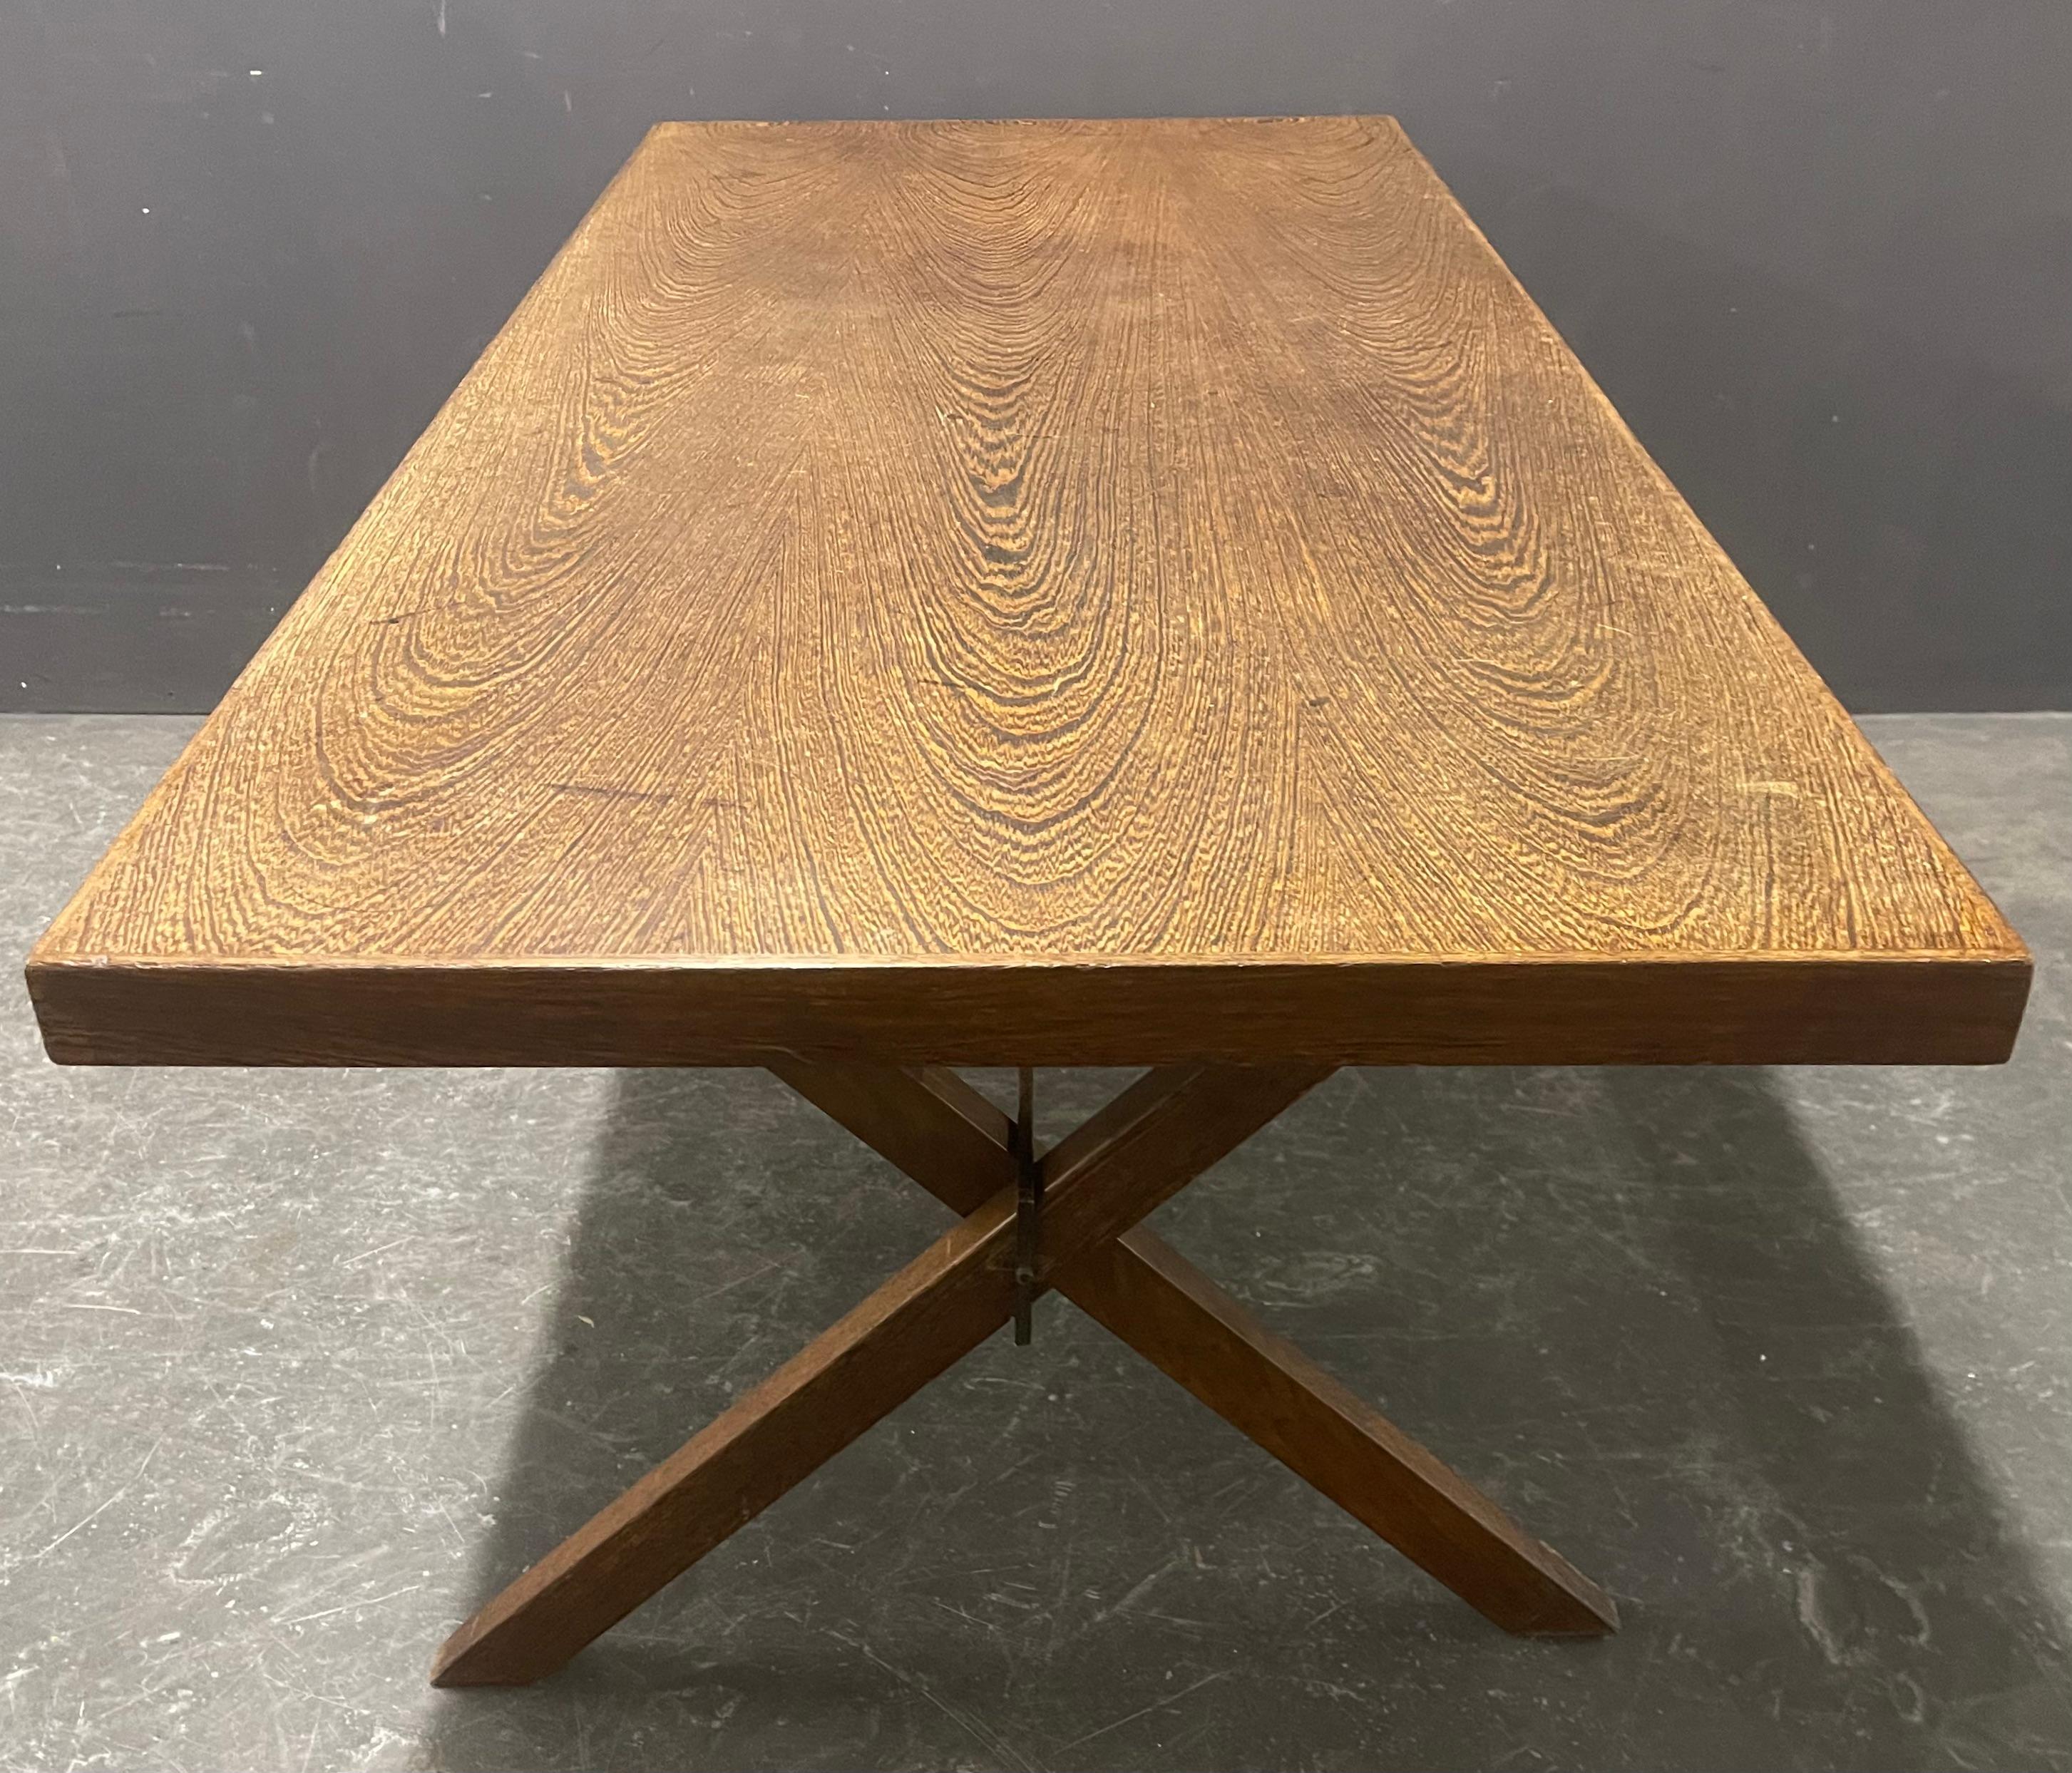 Wonderful Minimalistic Wenge Wood Table or Desk In Fair Condition For Sale In Munich, DE